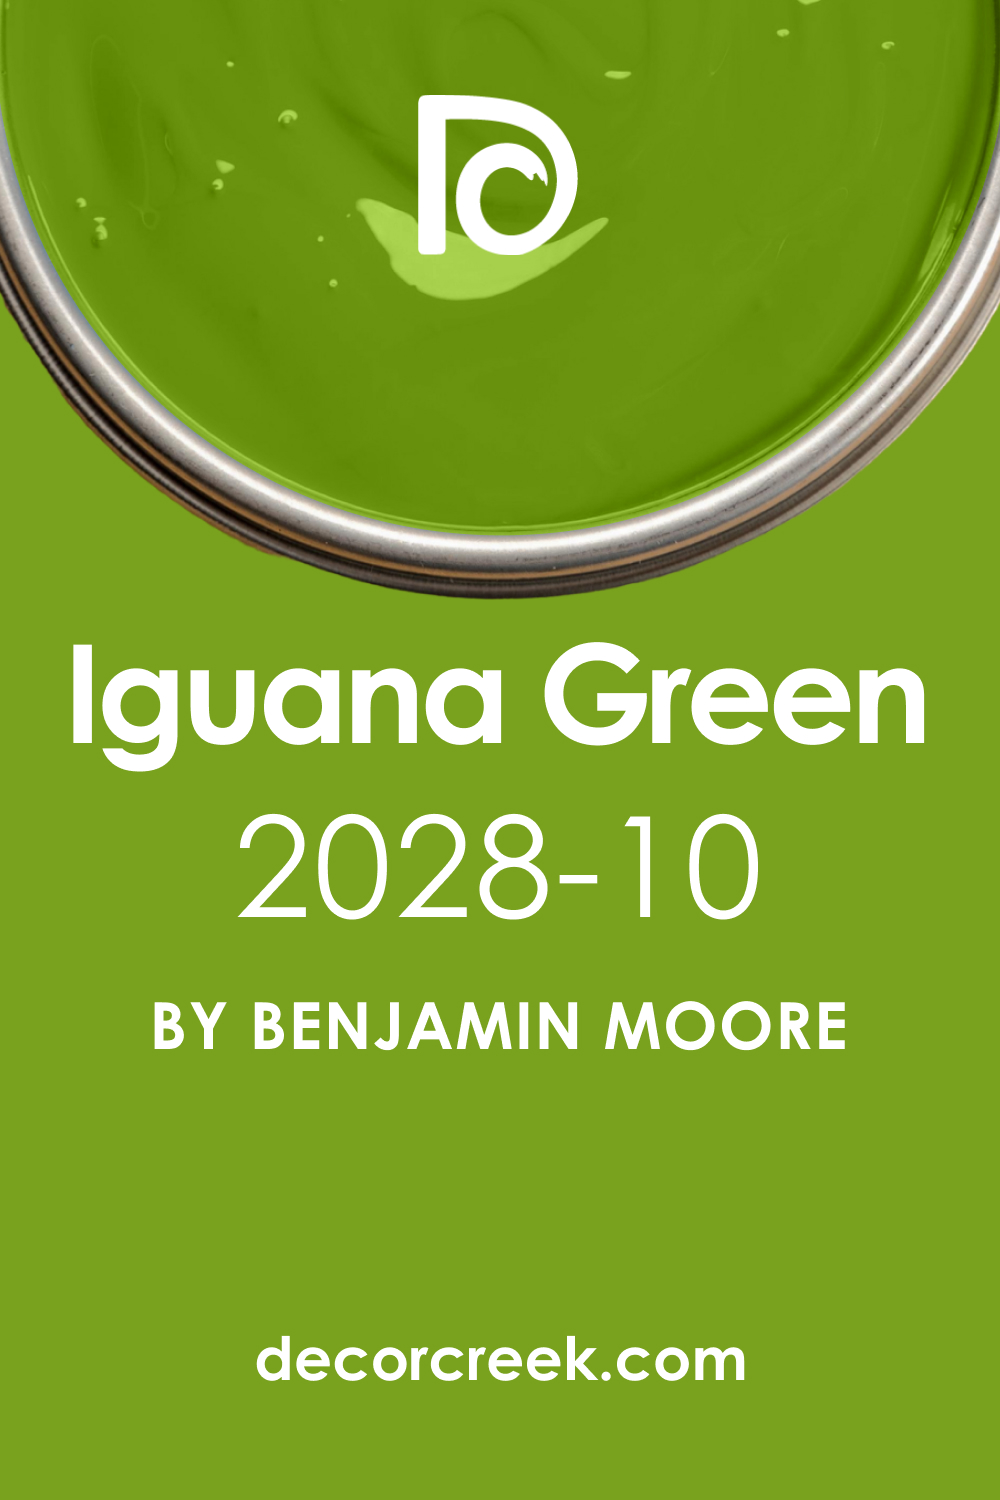 What Color Is Iguana Green 2028-10?